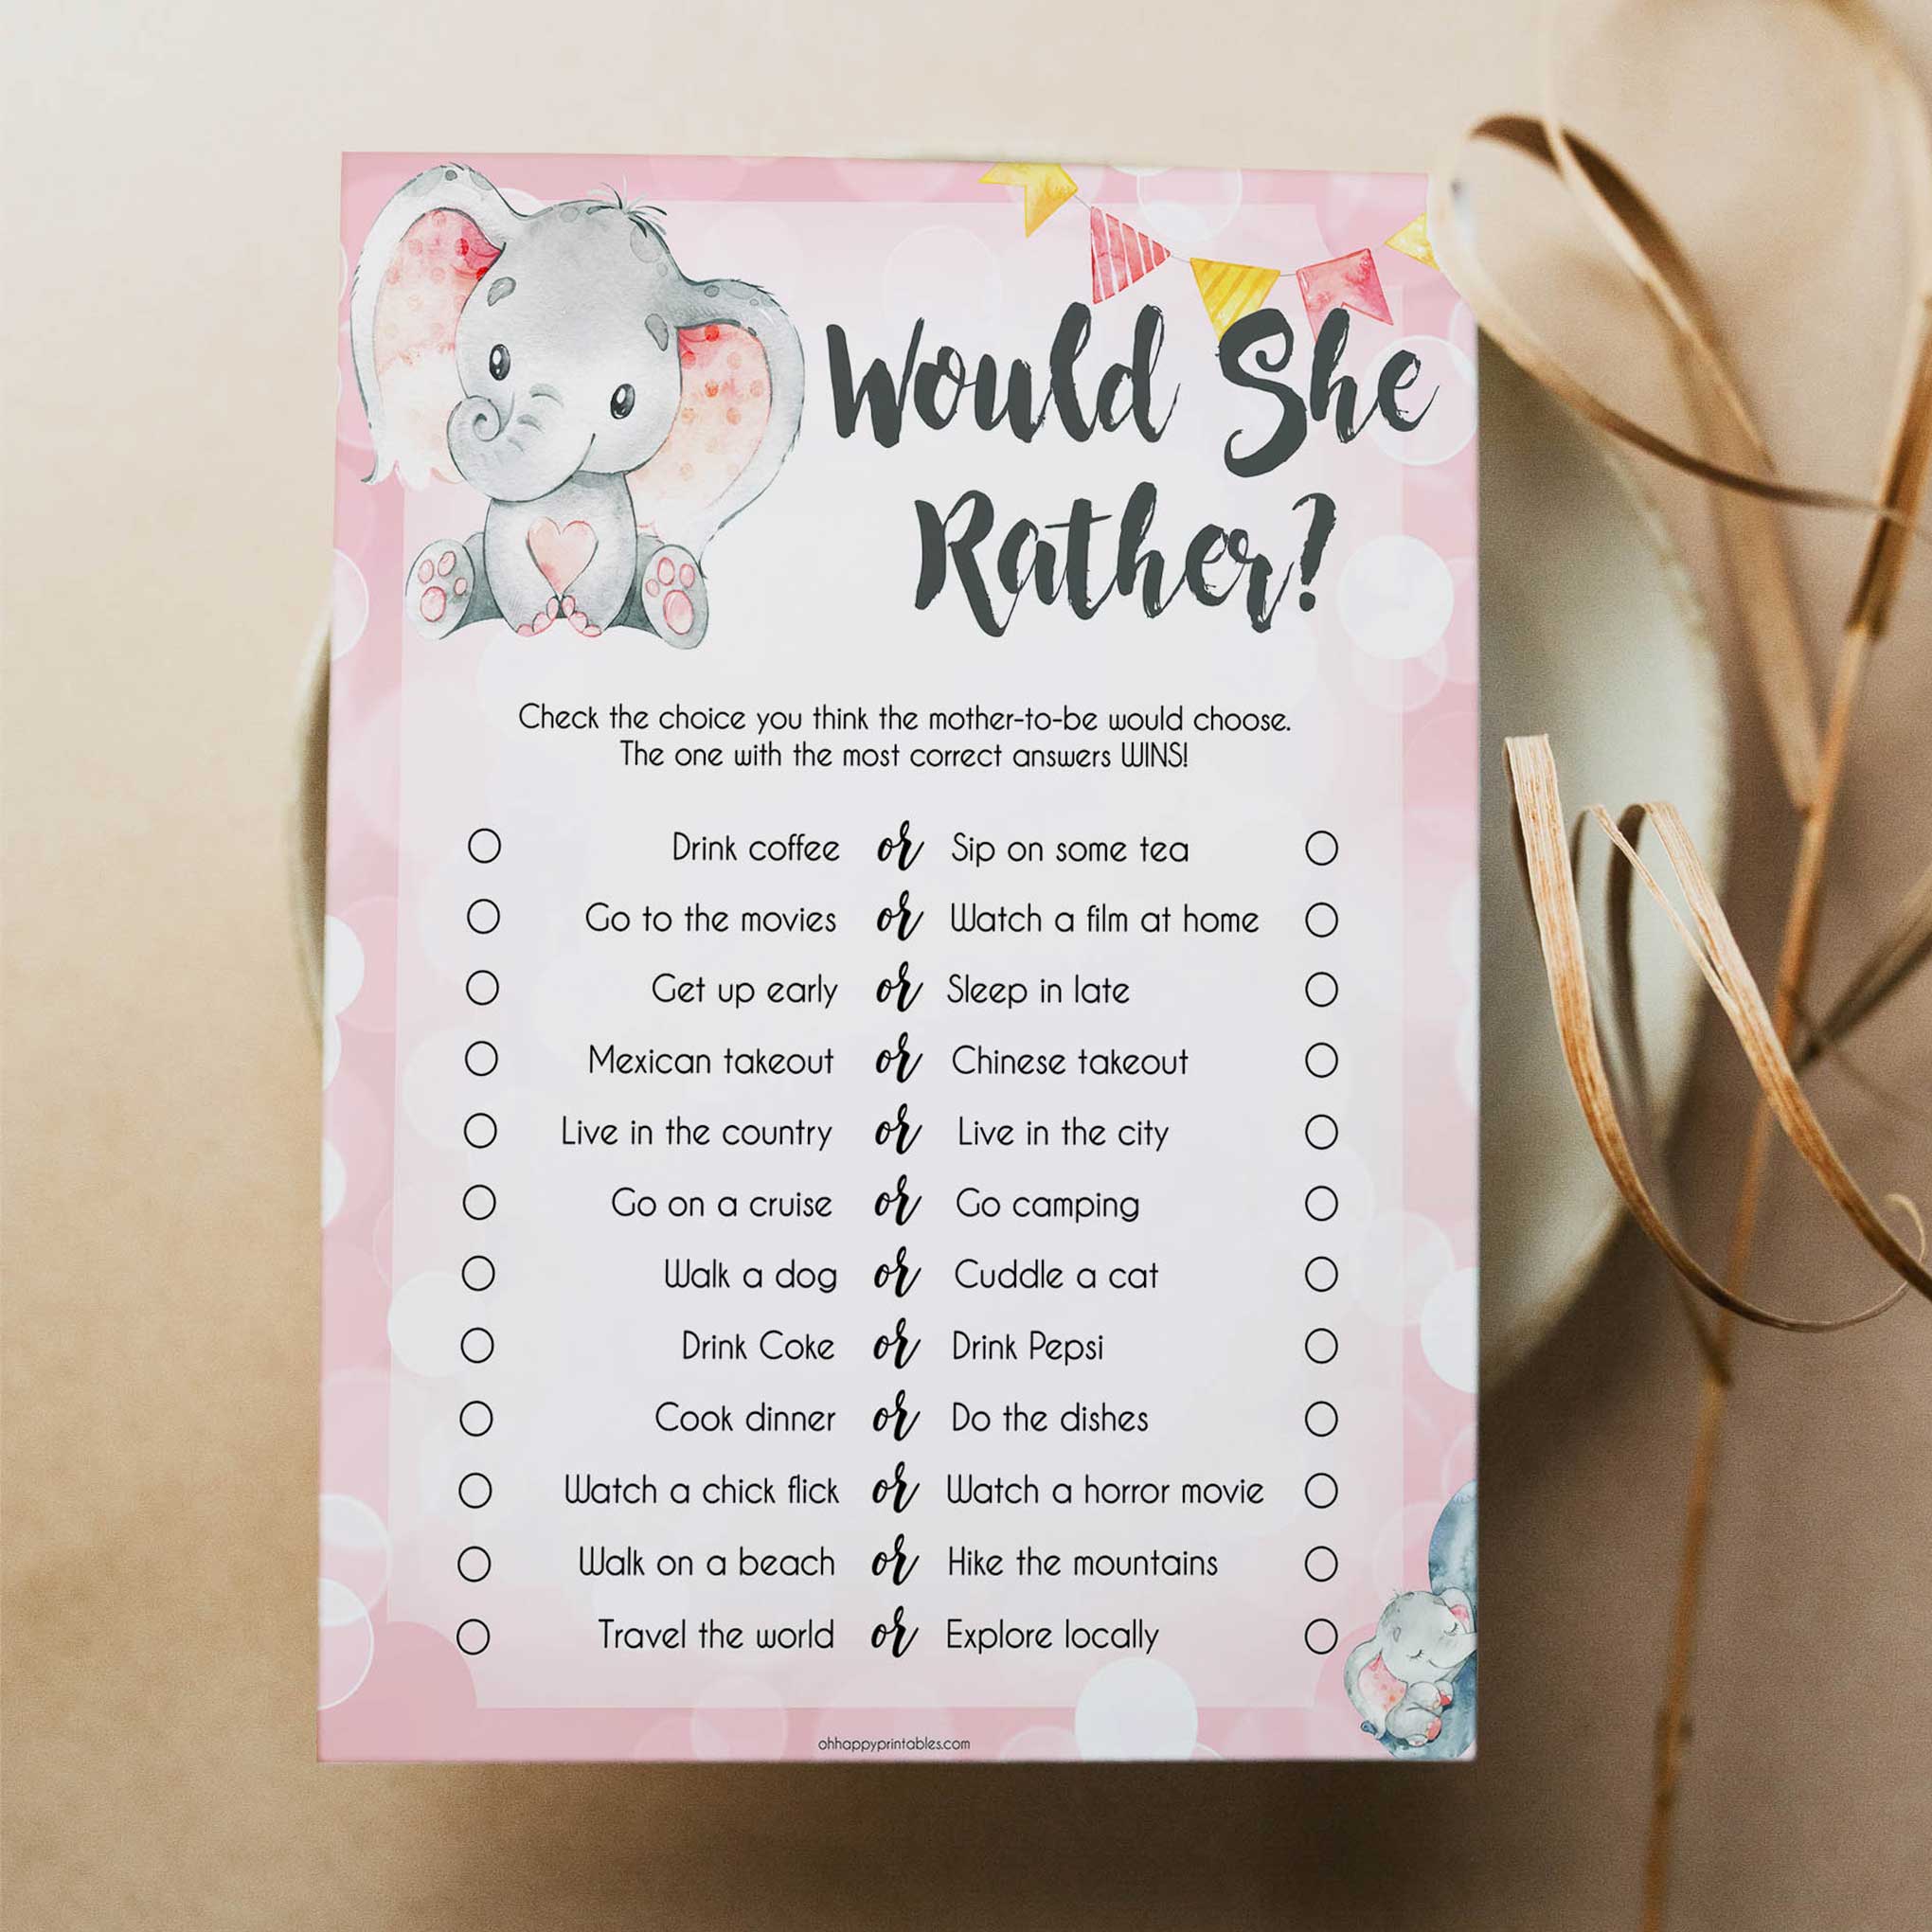 would she rather baby game, would she rather, Printable baby shower games, fun abby games, baby shower games, fun baby shower ideas, top baby shower ideas, pink elephant baby shower, pink baby shower ideas